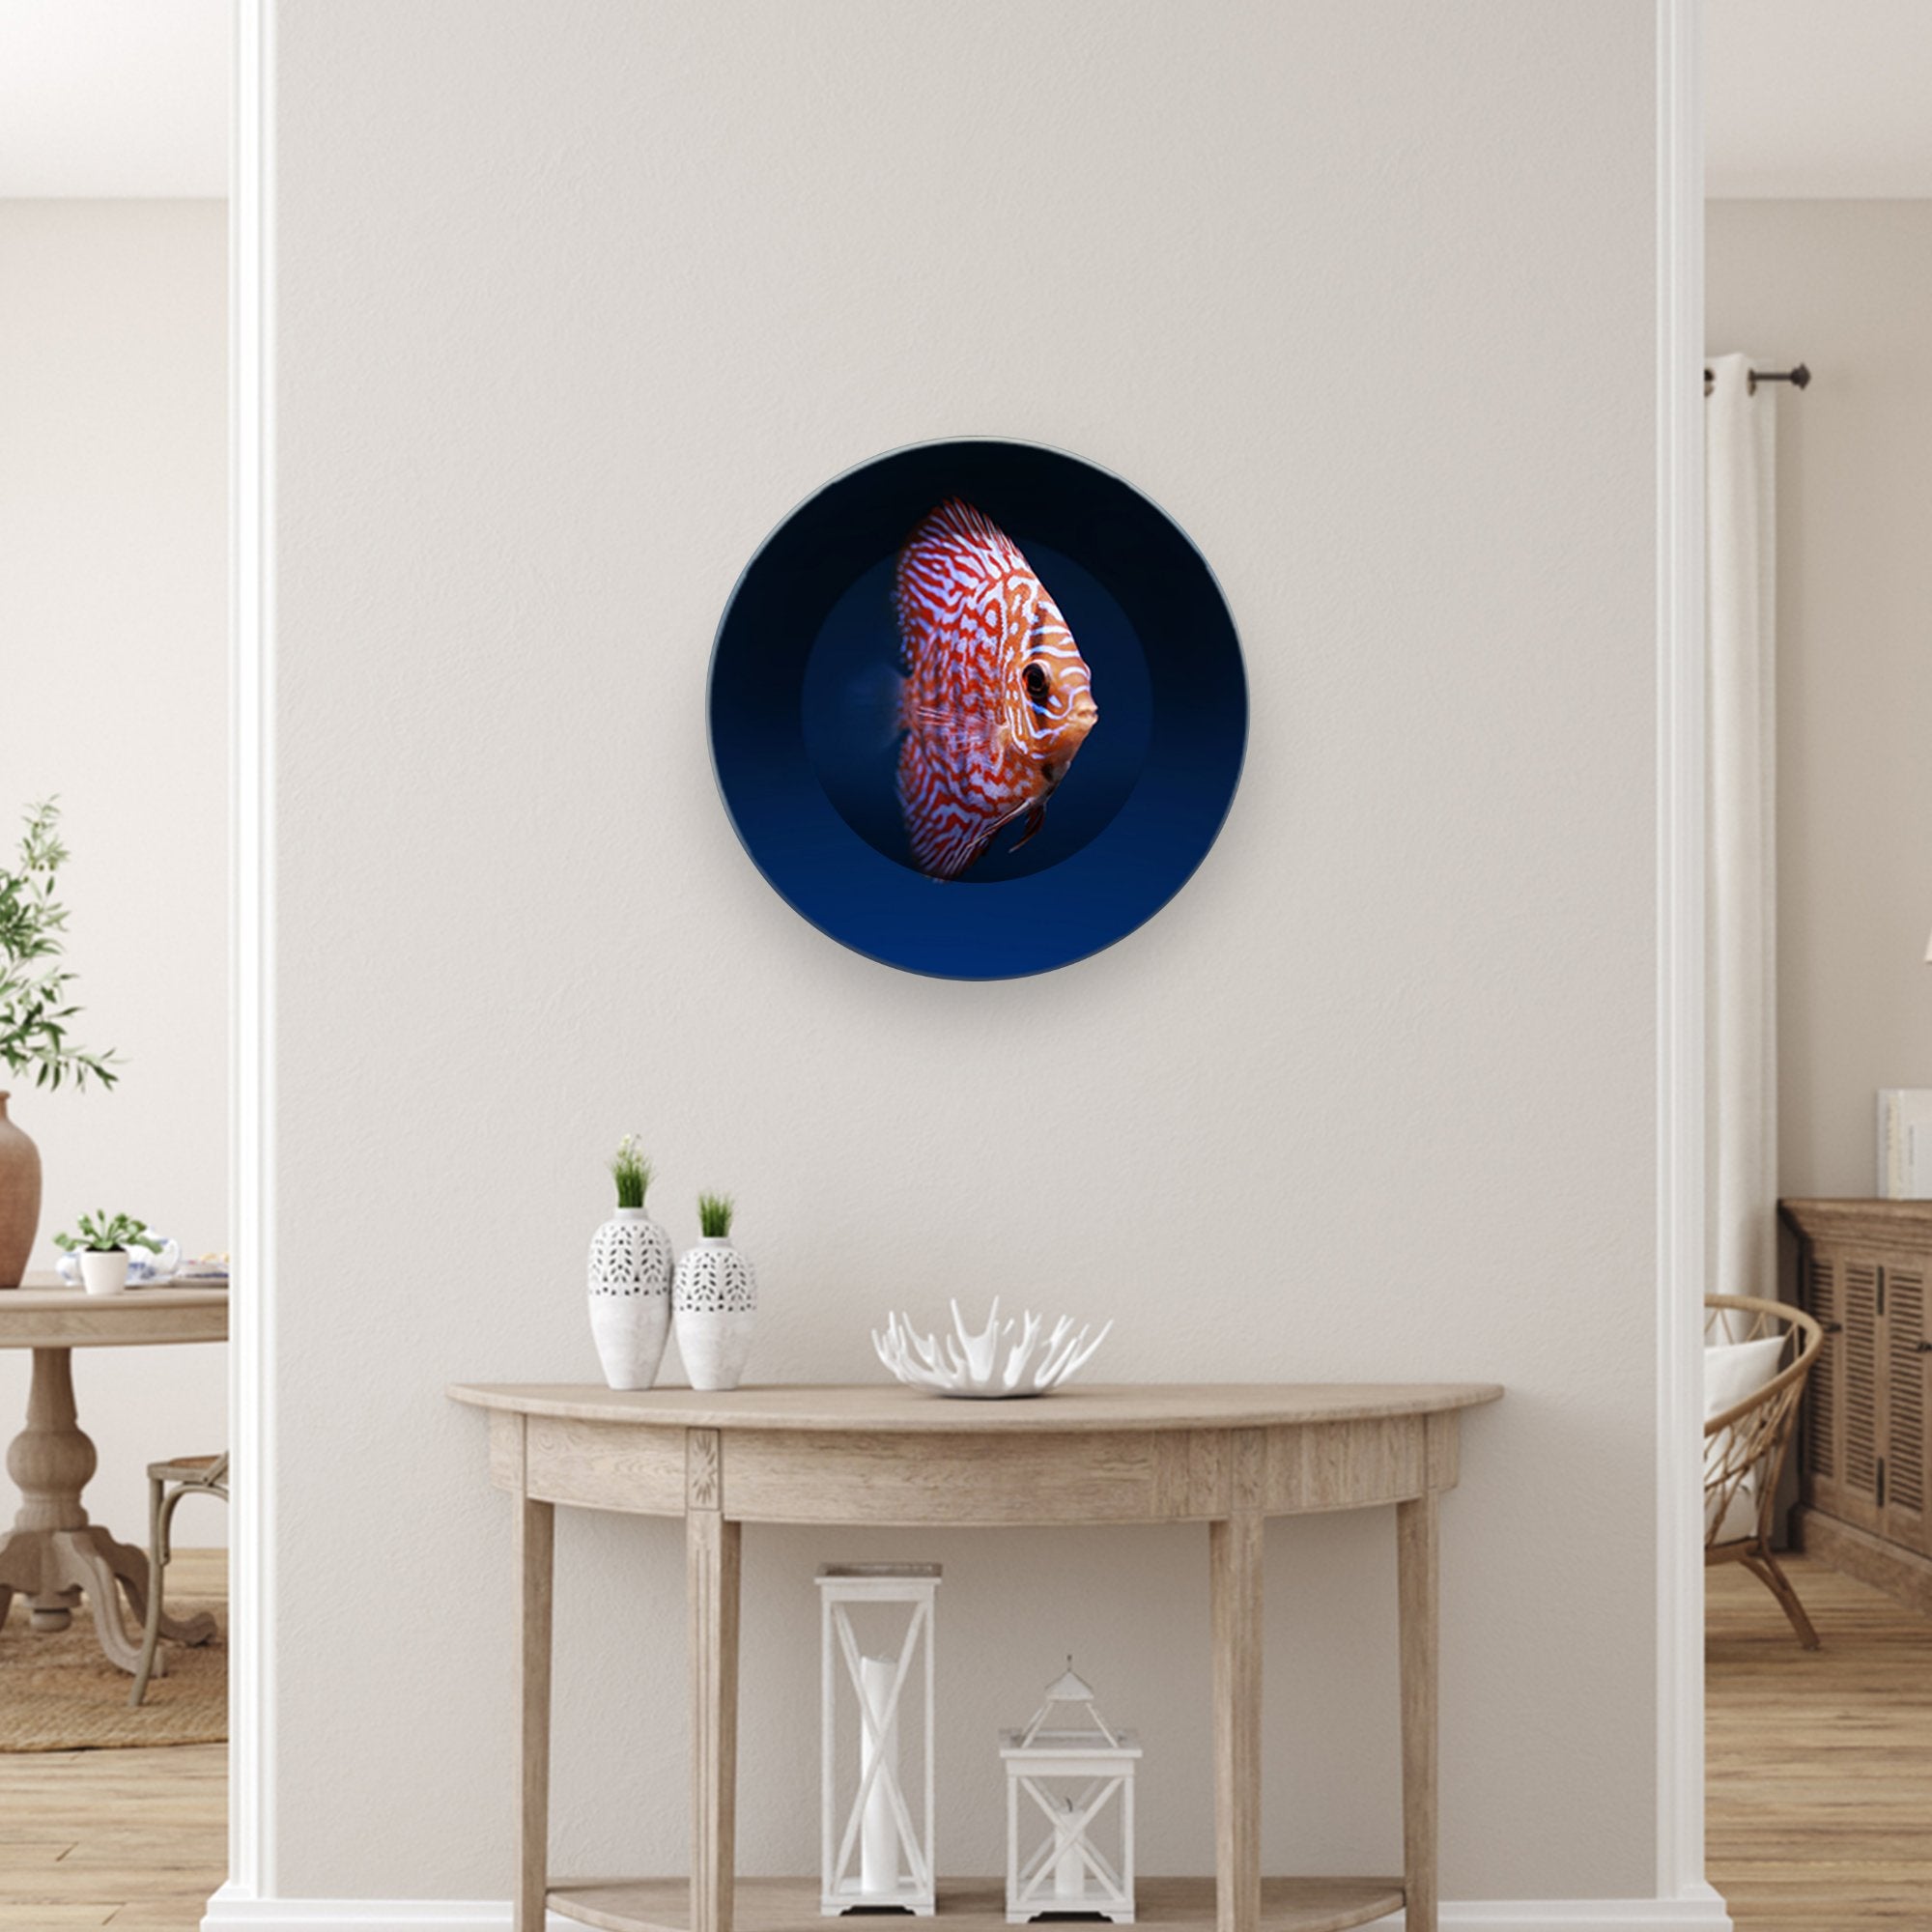  Ceramic Plate Wall Painting